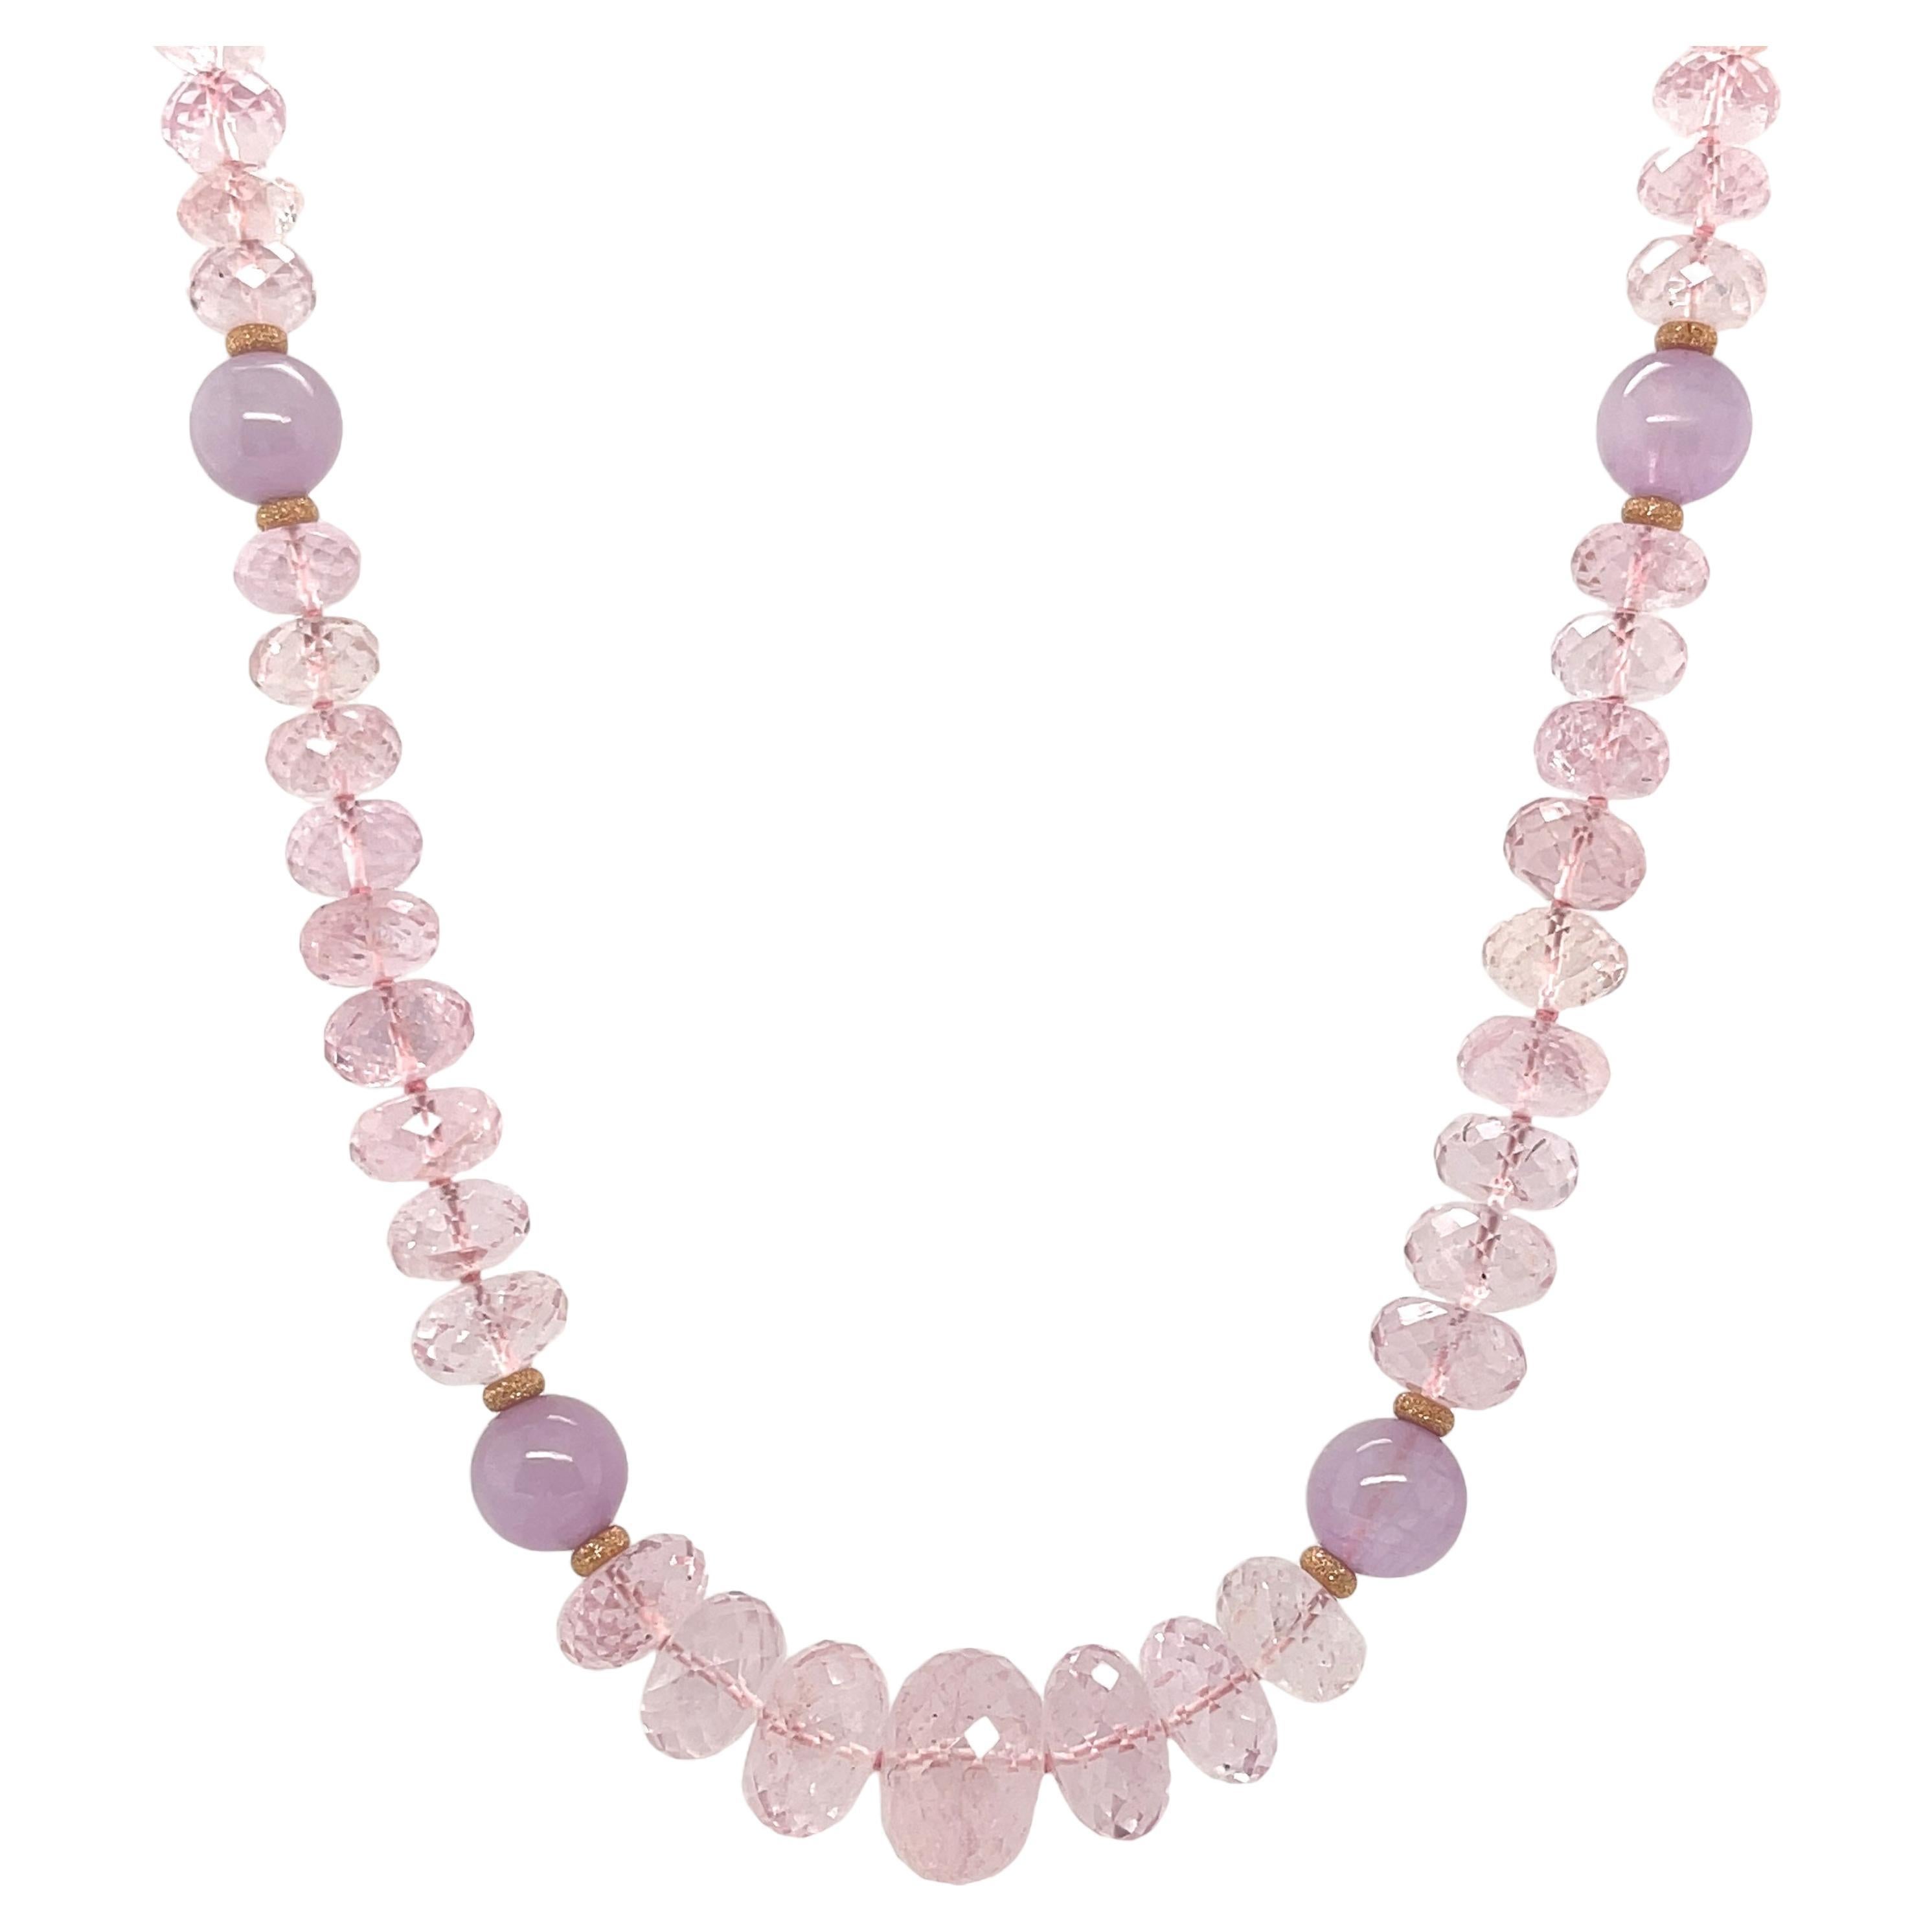 Rose Quartz and Kunzite Beaded Necklace with Rose Gold Accents For Sale